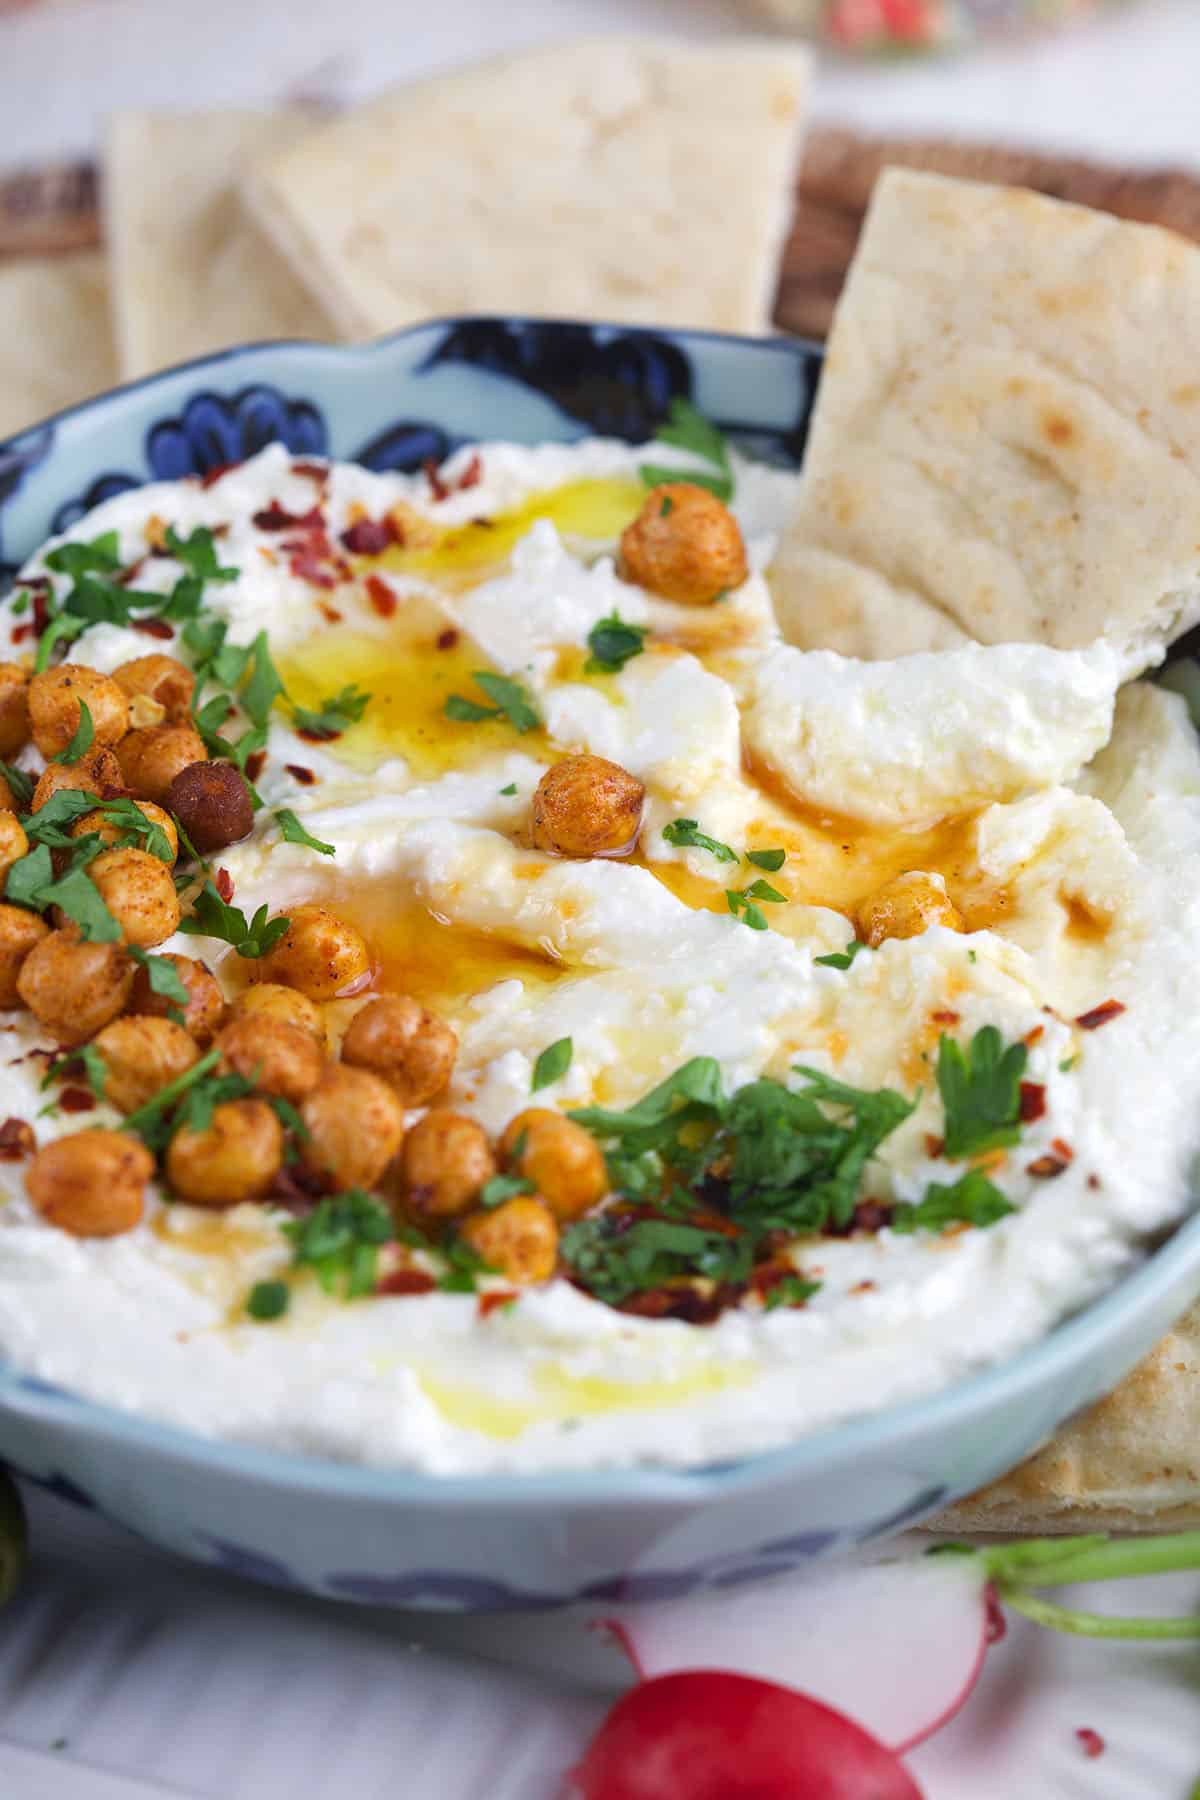 A piece of pita bread is being dipped into feta dip. 